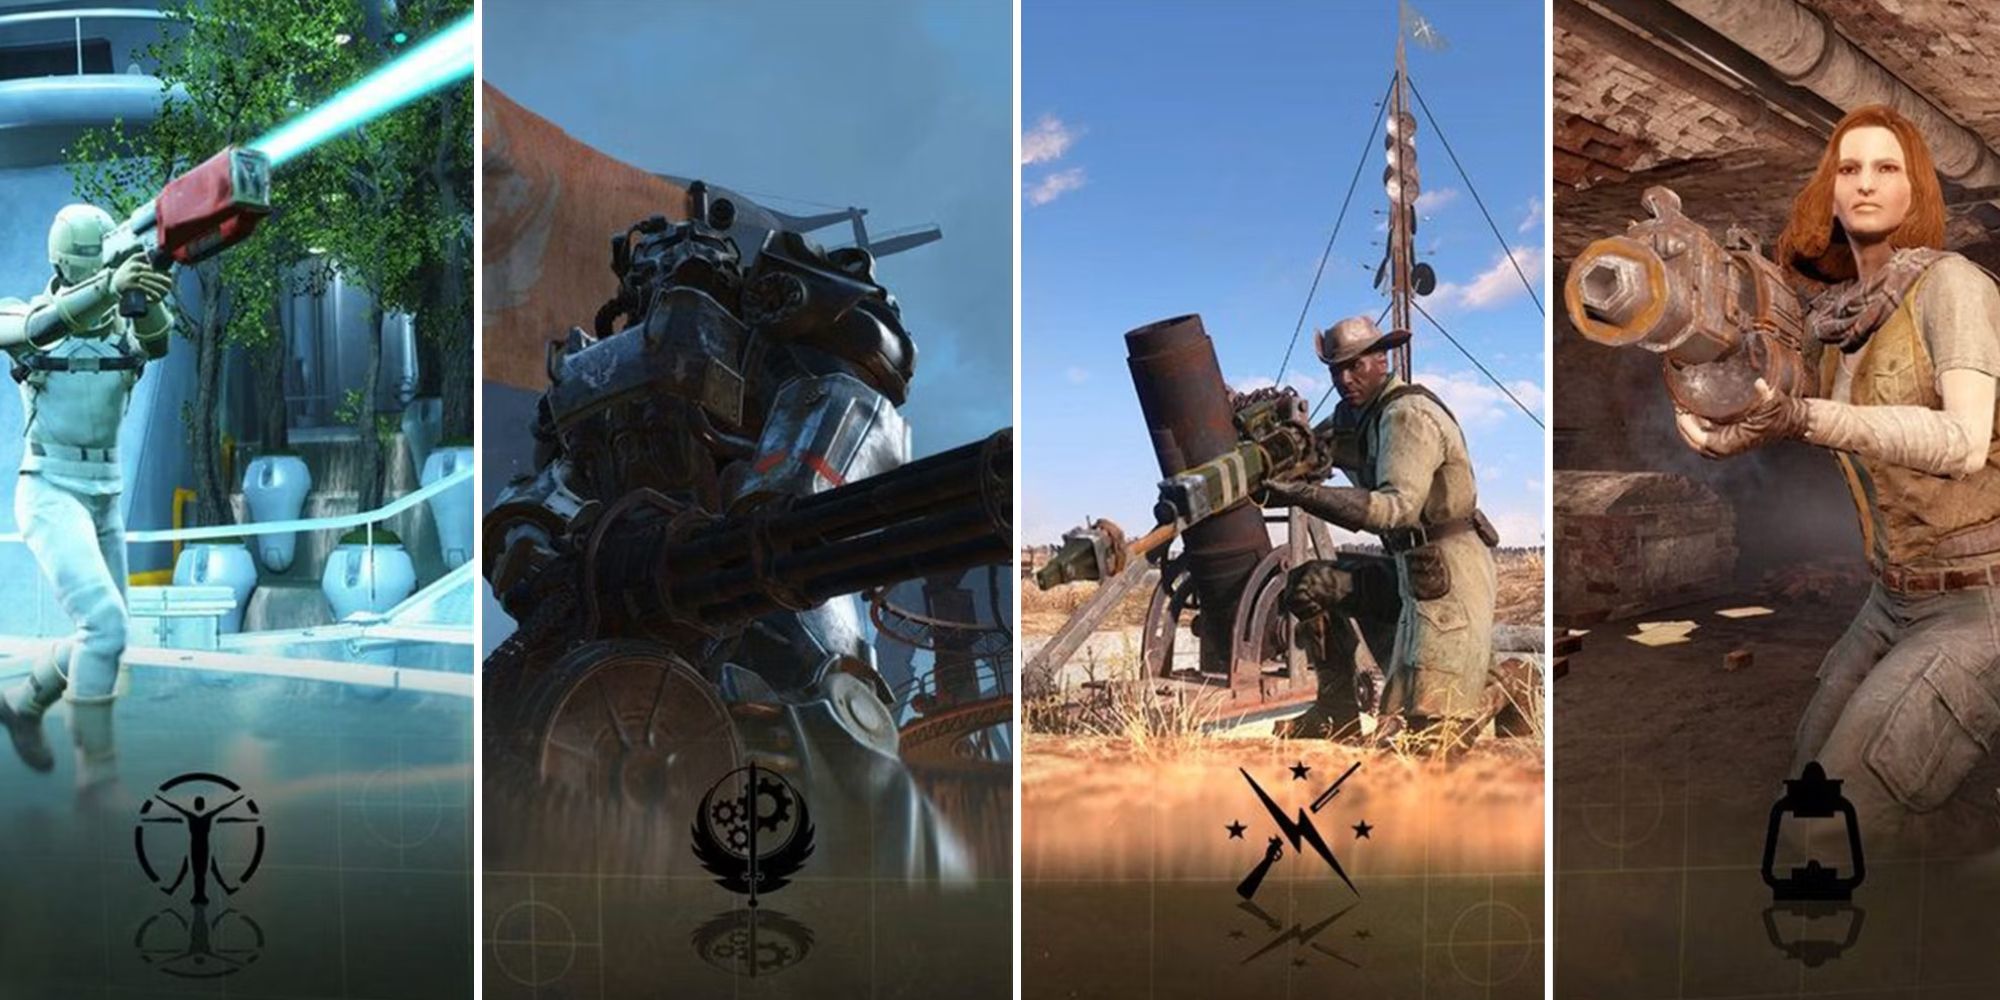 The four factions of Fallout 4